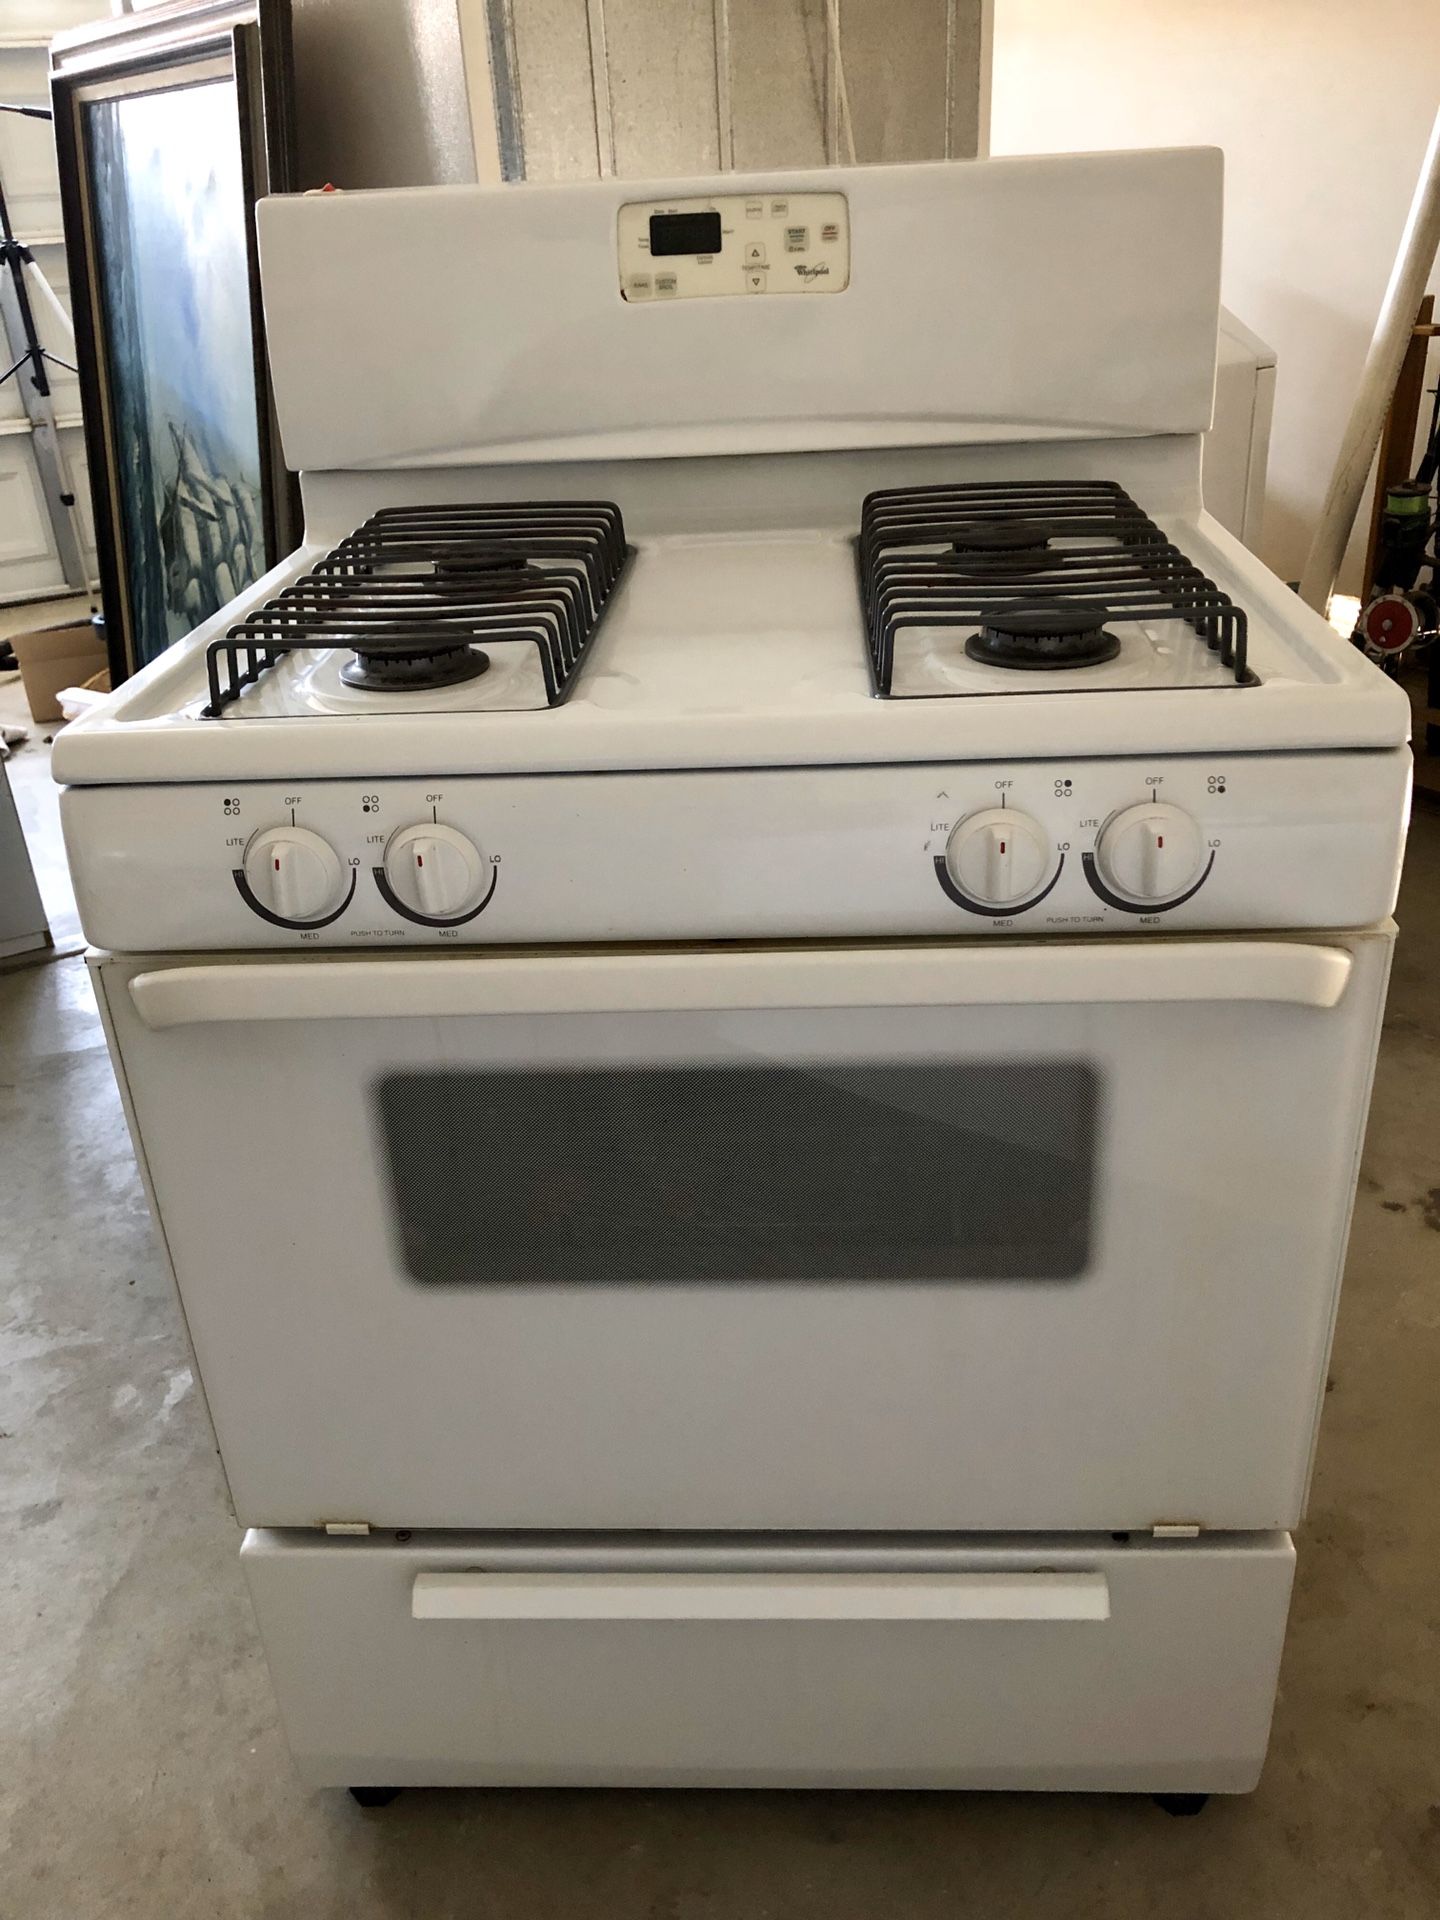 Great Whirlpool Appliances Priced to Sell! Dishwasher, Stove / Range and overhead microwave.